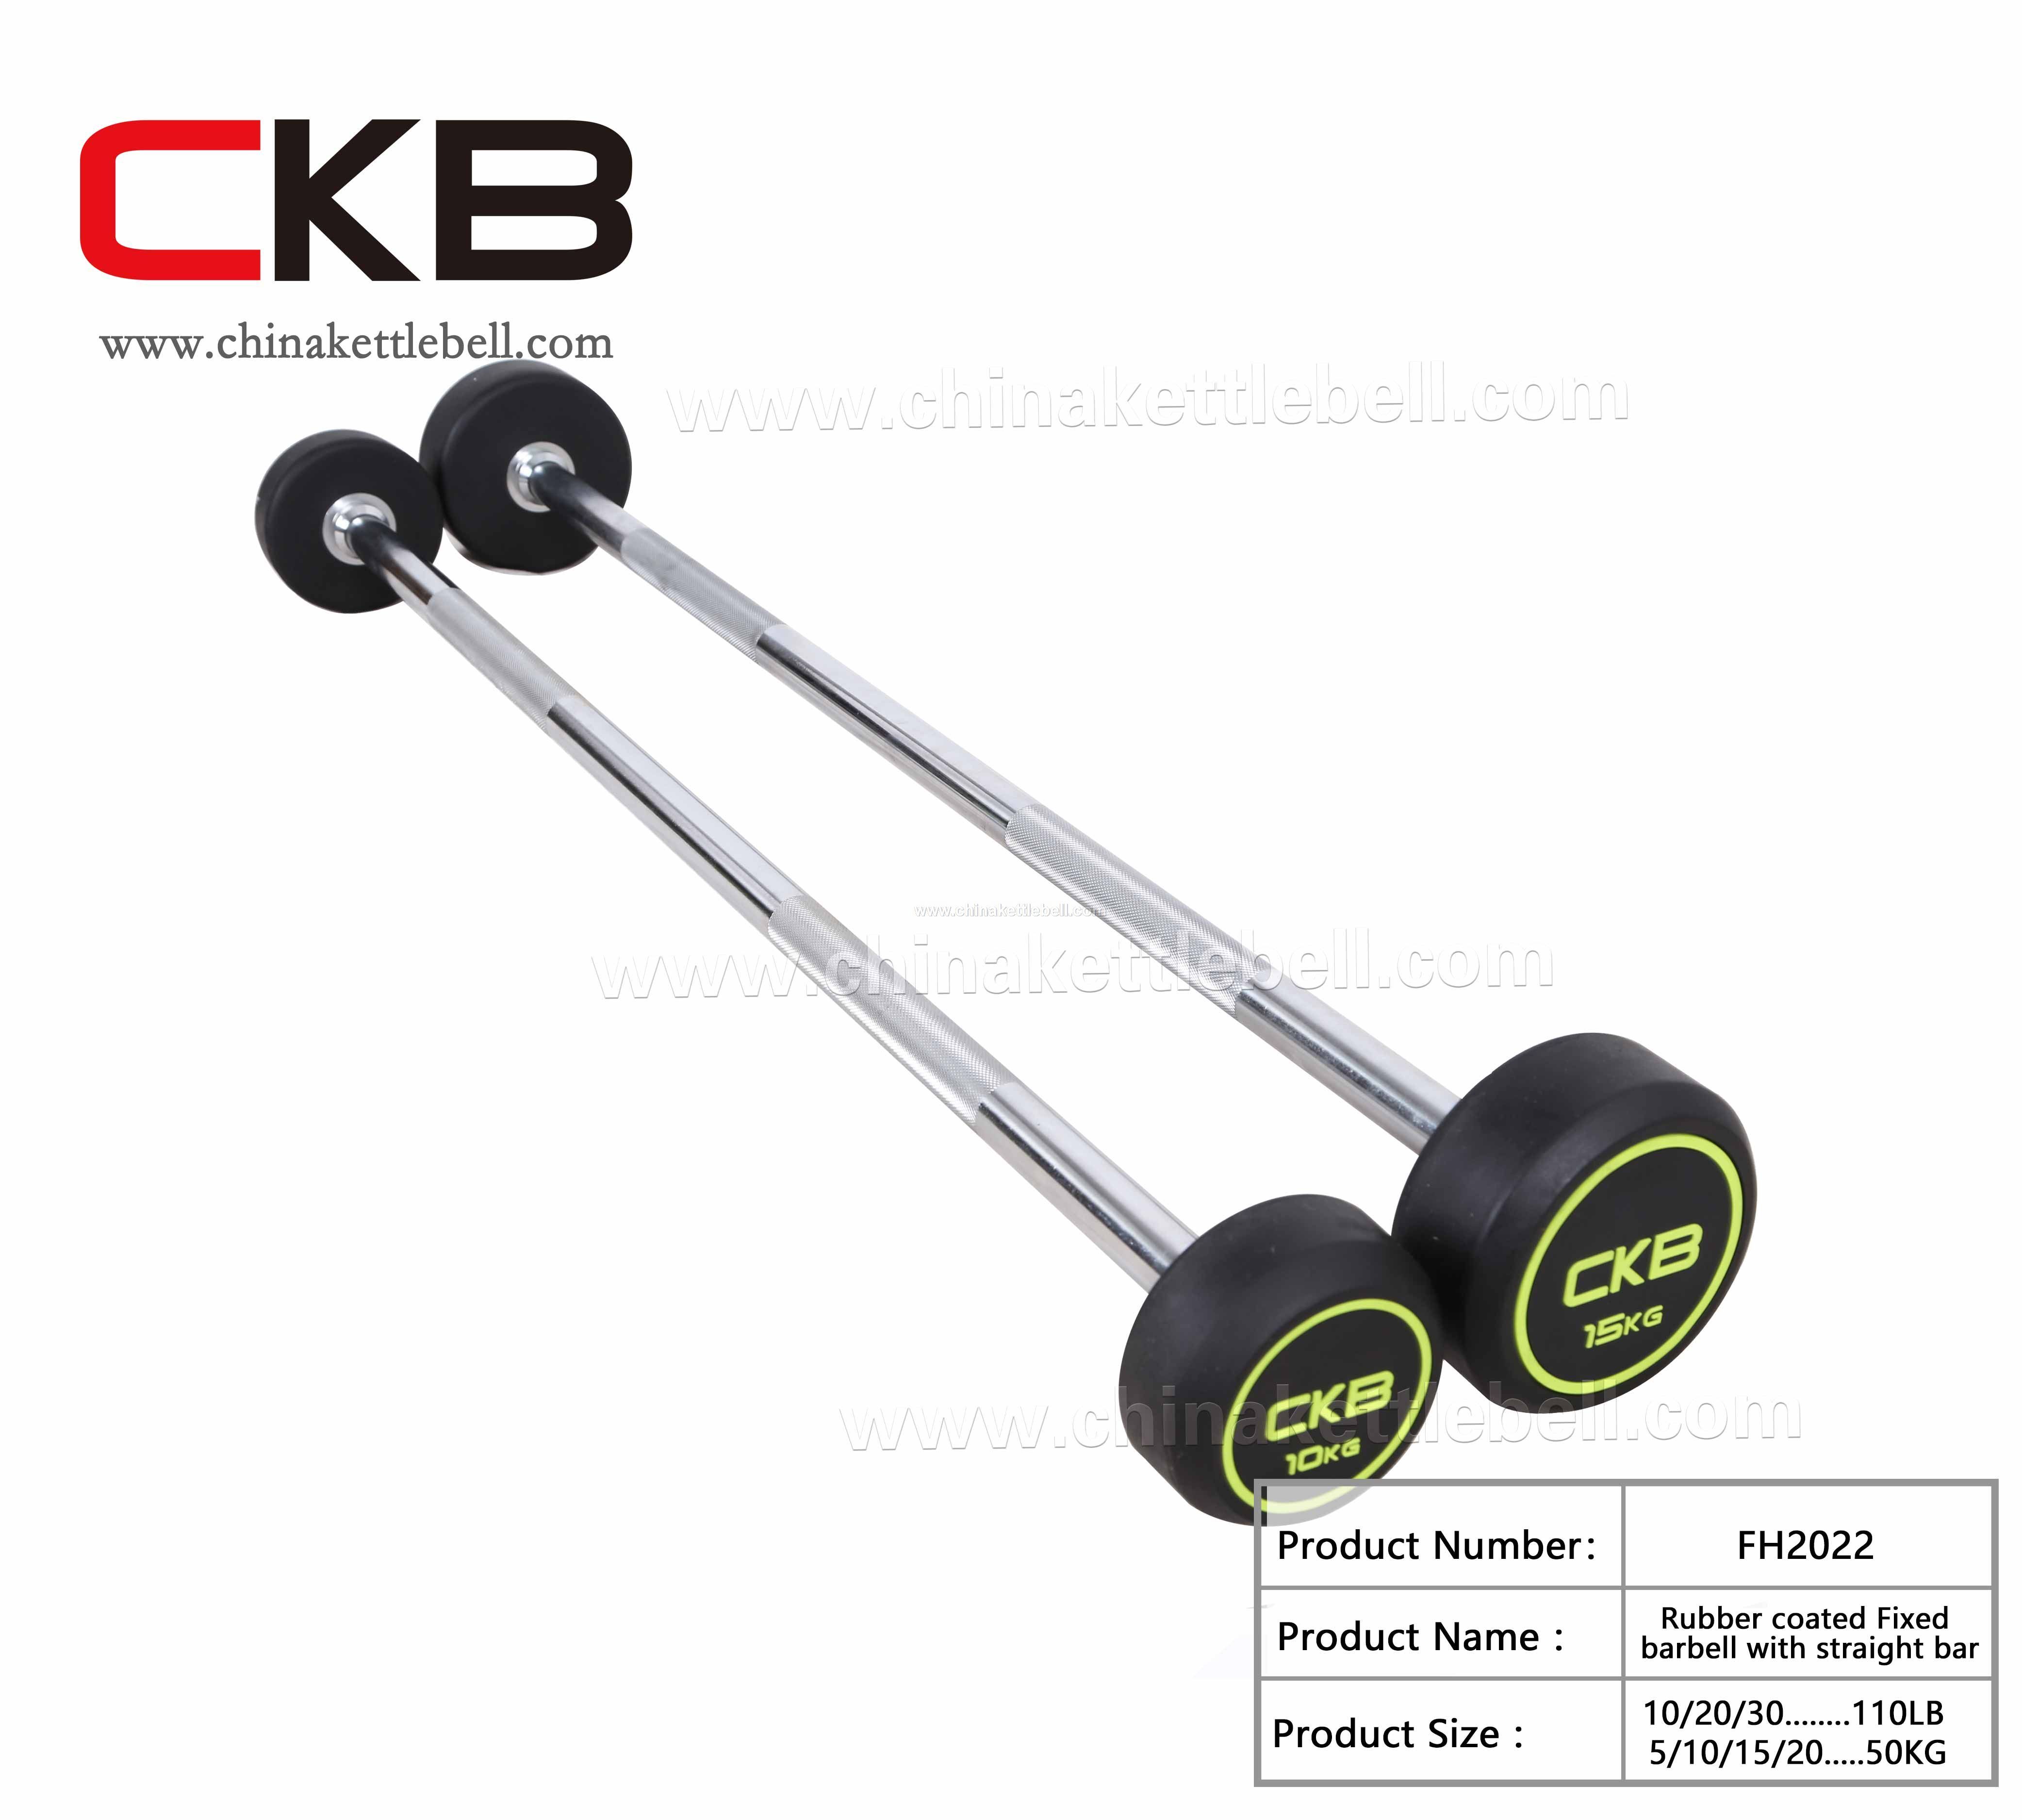 Rubber coated Fixed barbell with straight bar